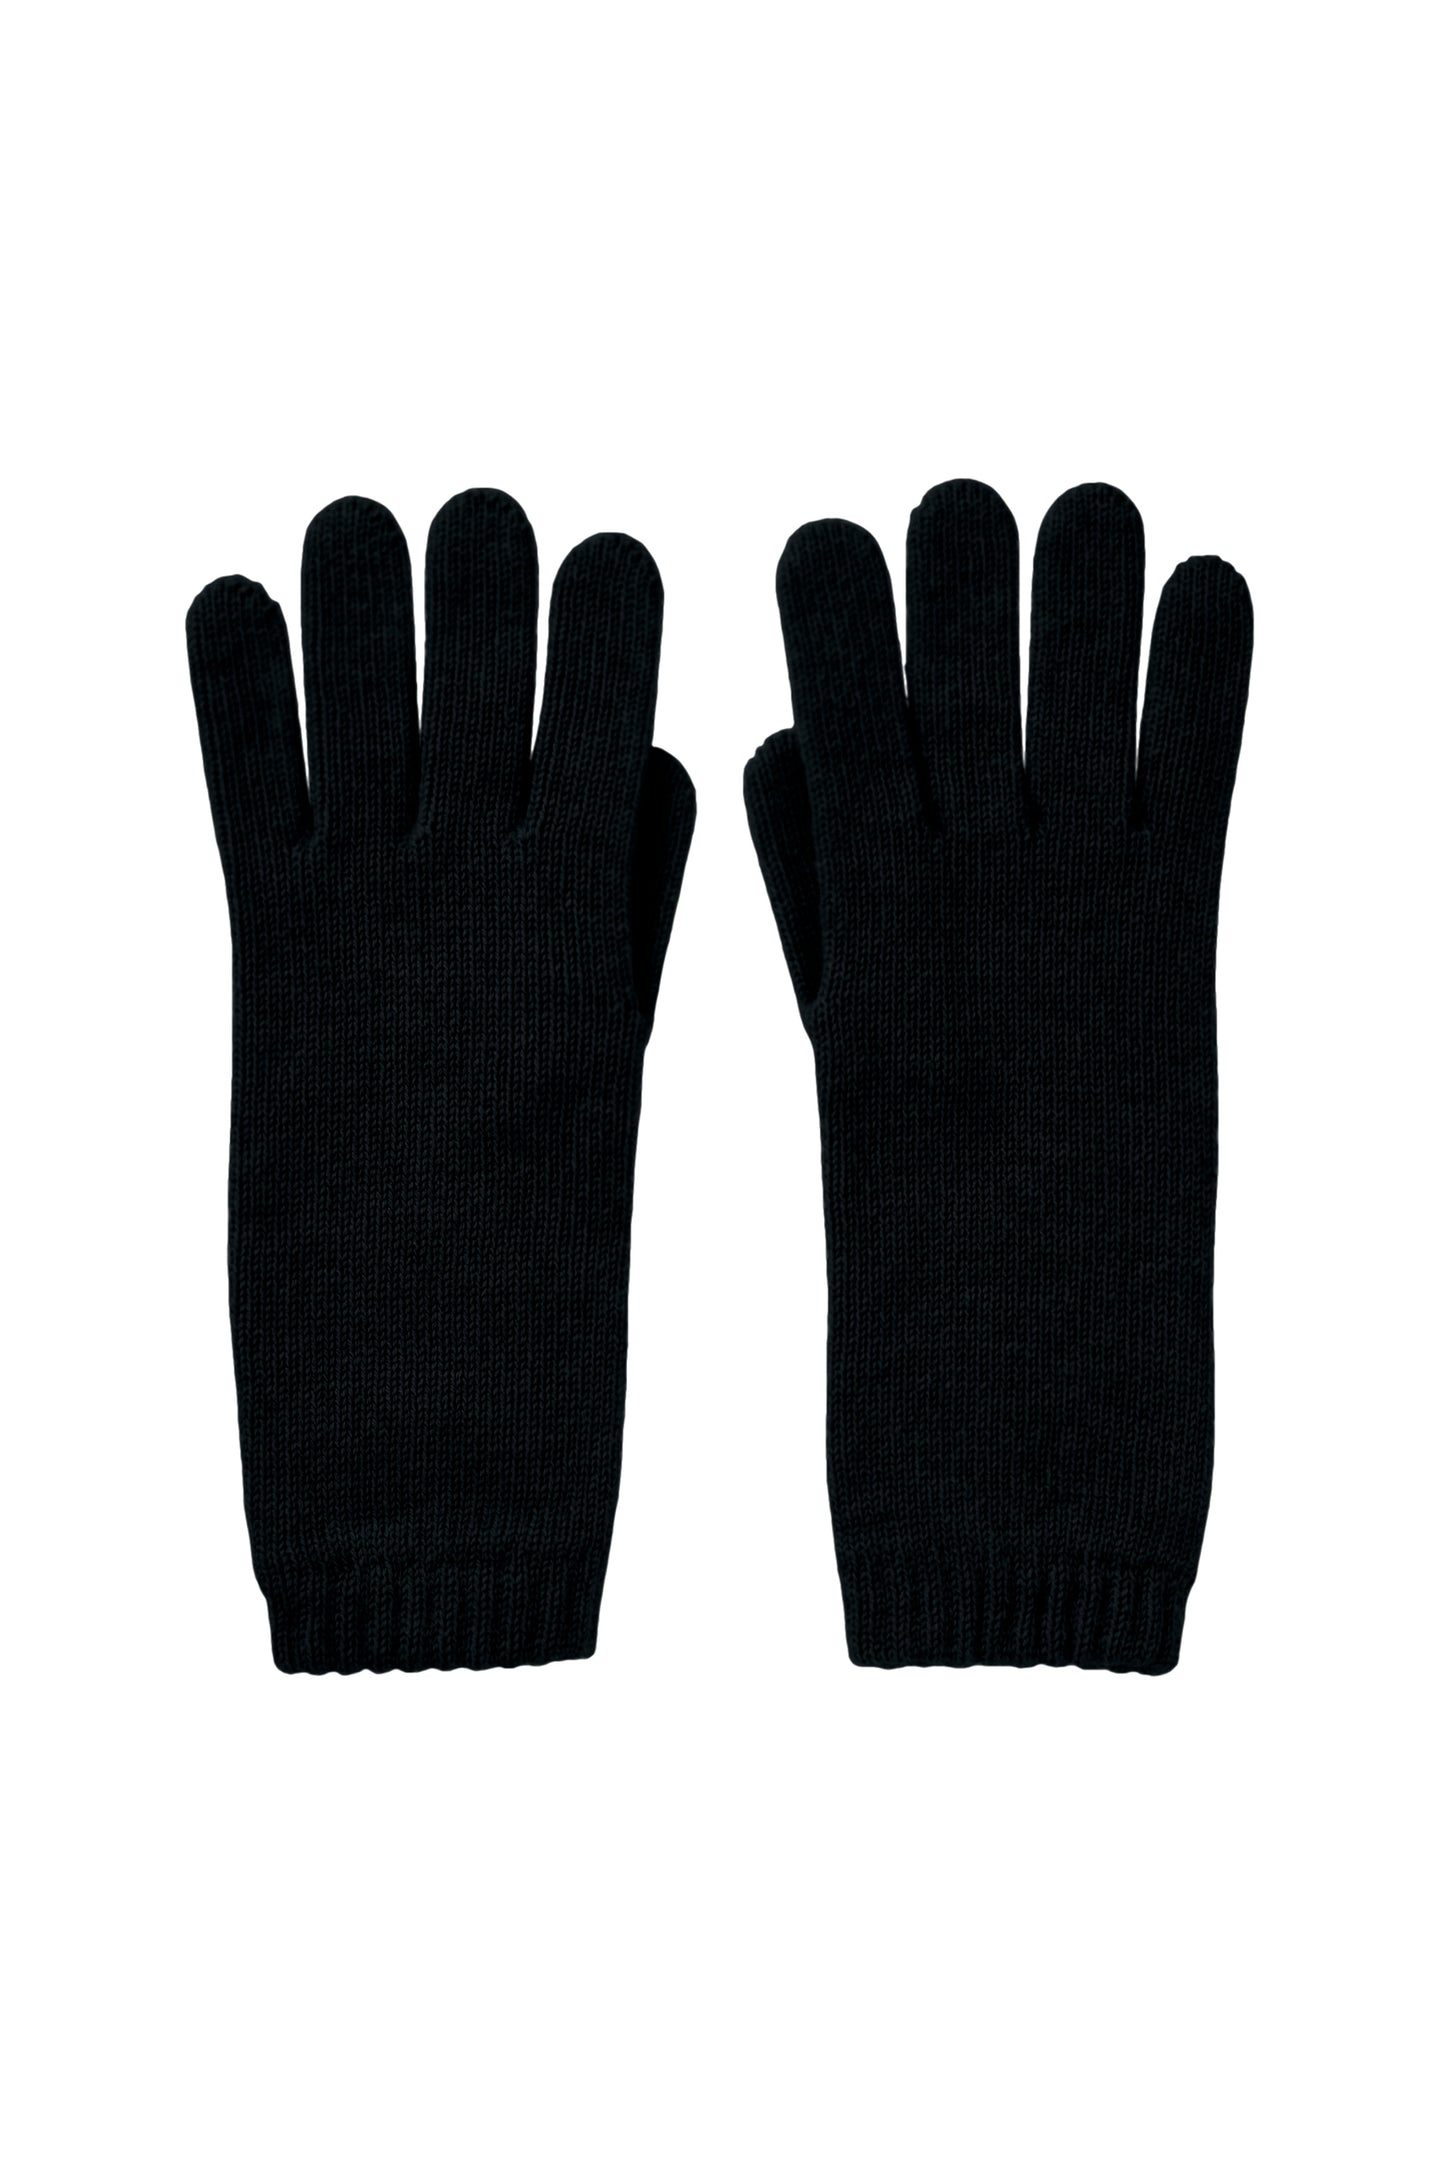 Johnstons of Elgin AW24 Knitted Accessory Black Women's Cashmere Gloves HAD03226SA090052